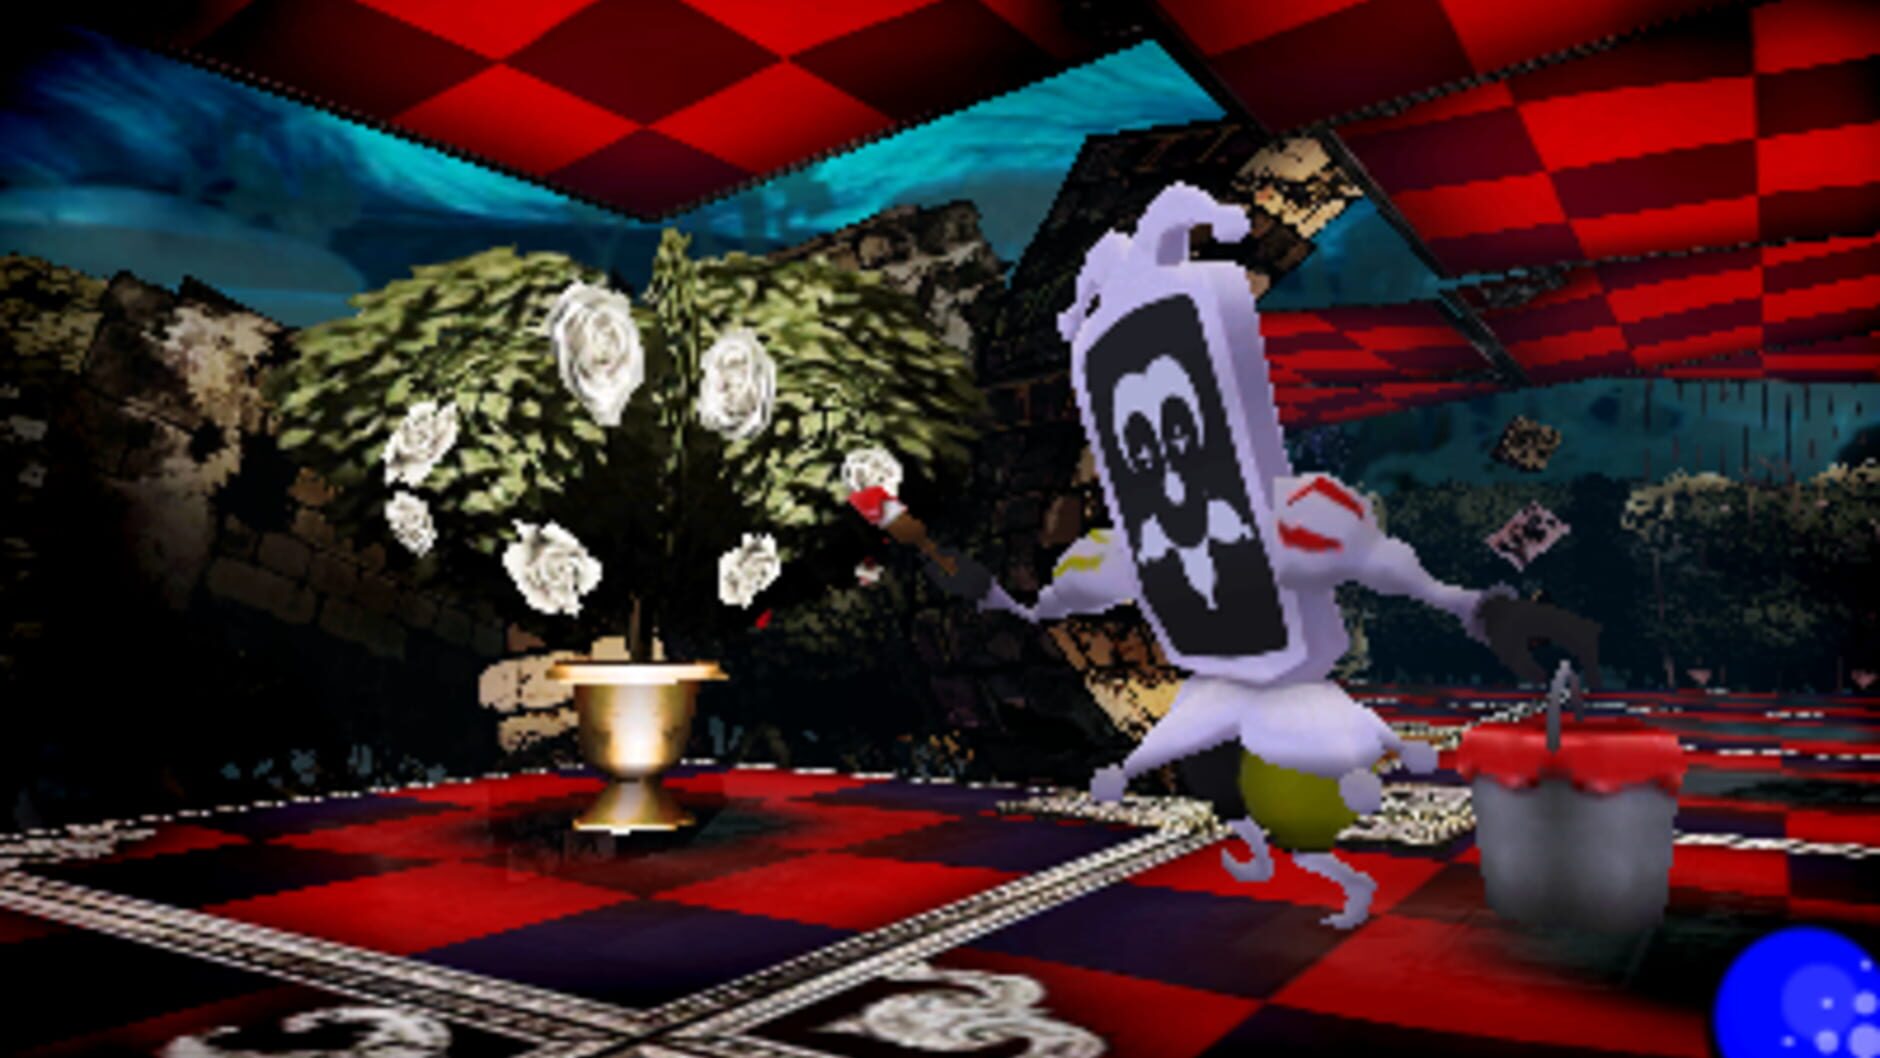 Screenshot for Persona Q: Shadow of the Labyrinth